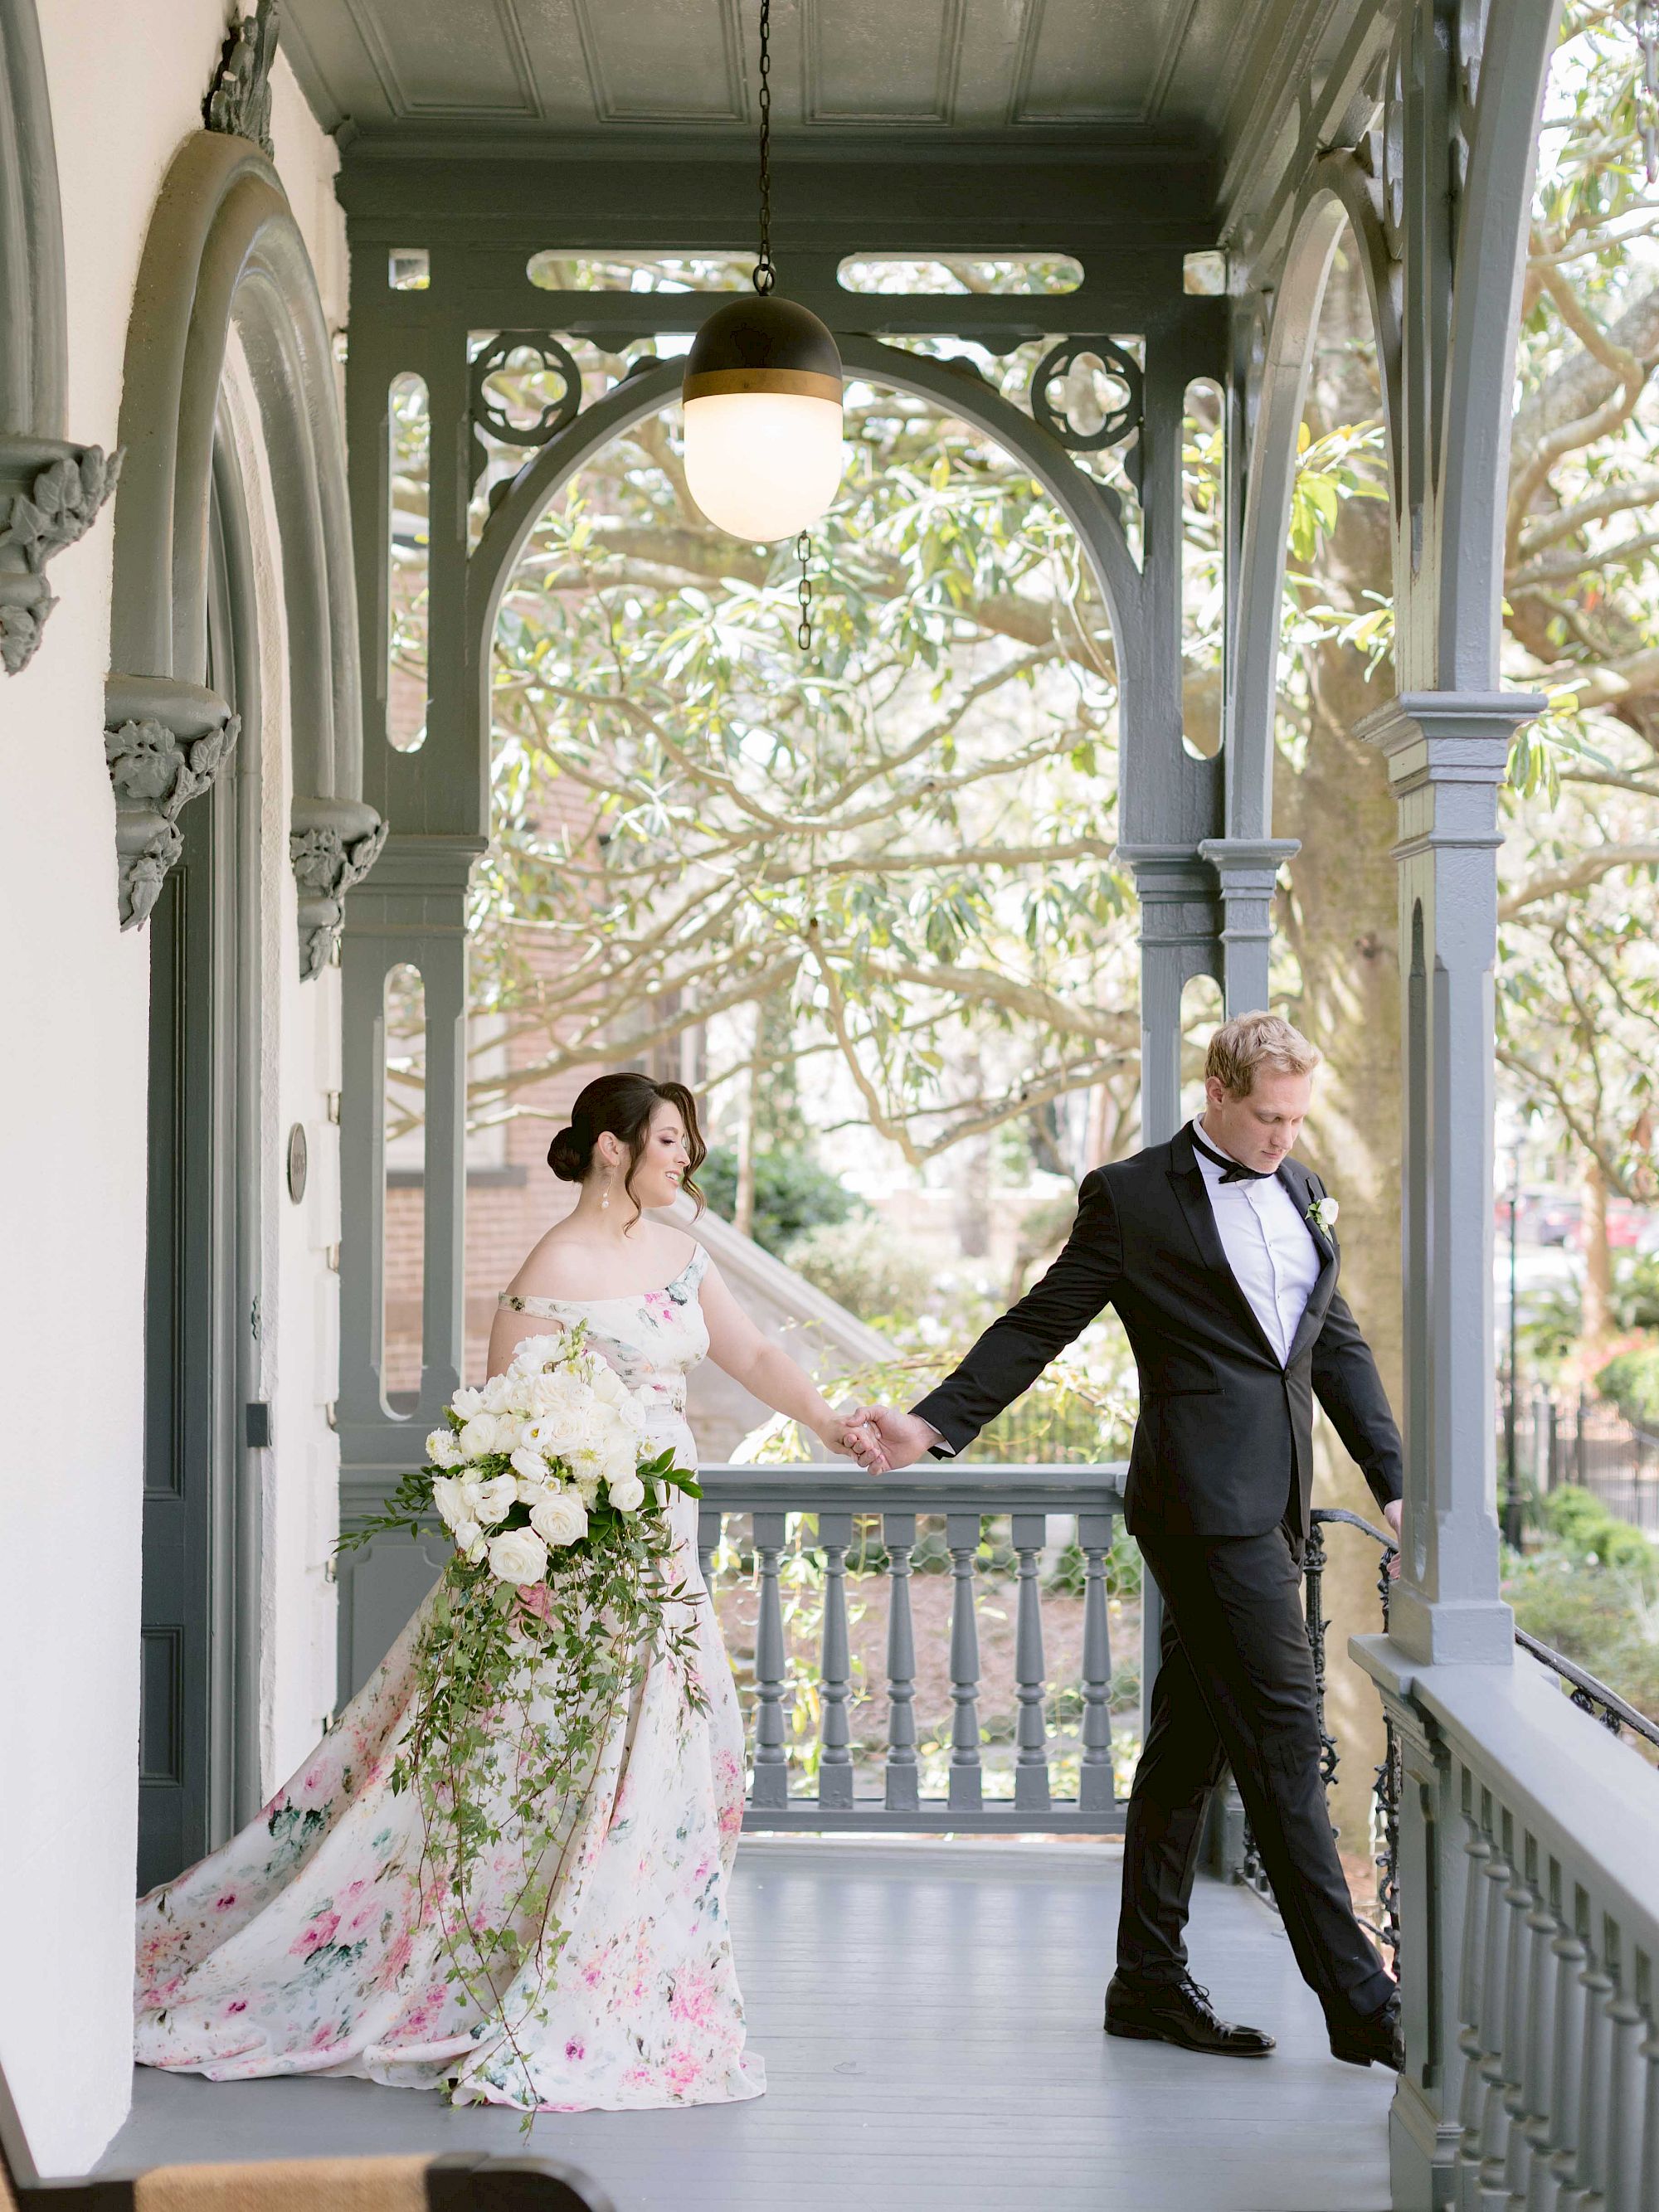 A couple in wedding attire is holding hands on a decorated porch, surrounded by greenery. The bride is in a floral gown, and the groom is in a suit.